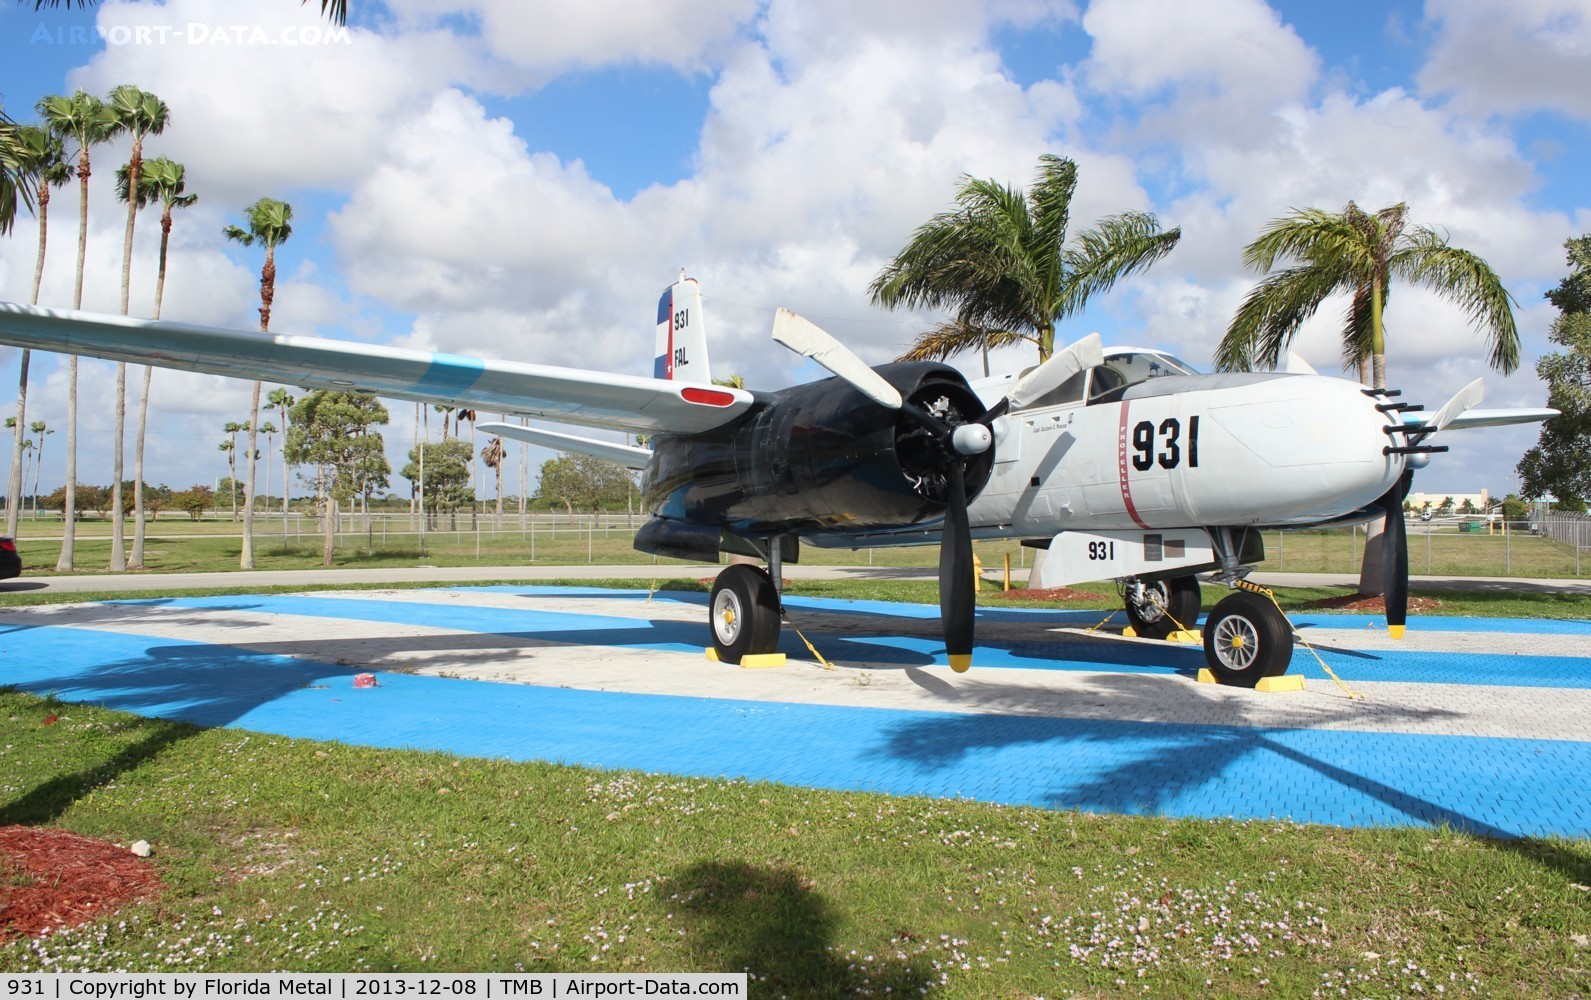 931, 1944 Douglas A-26B Invader C/N 28719, A-26C of the Free Cuban Air Force - dedicated to my long time girlfriend Maria Evangelina Castillo, who had an uncle who was a crew member of one of these planes used in the Bay of Pigs invasion.